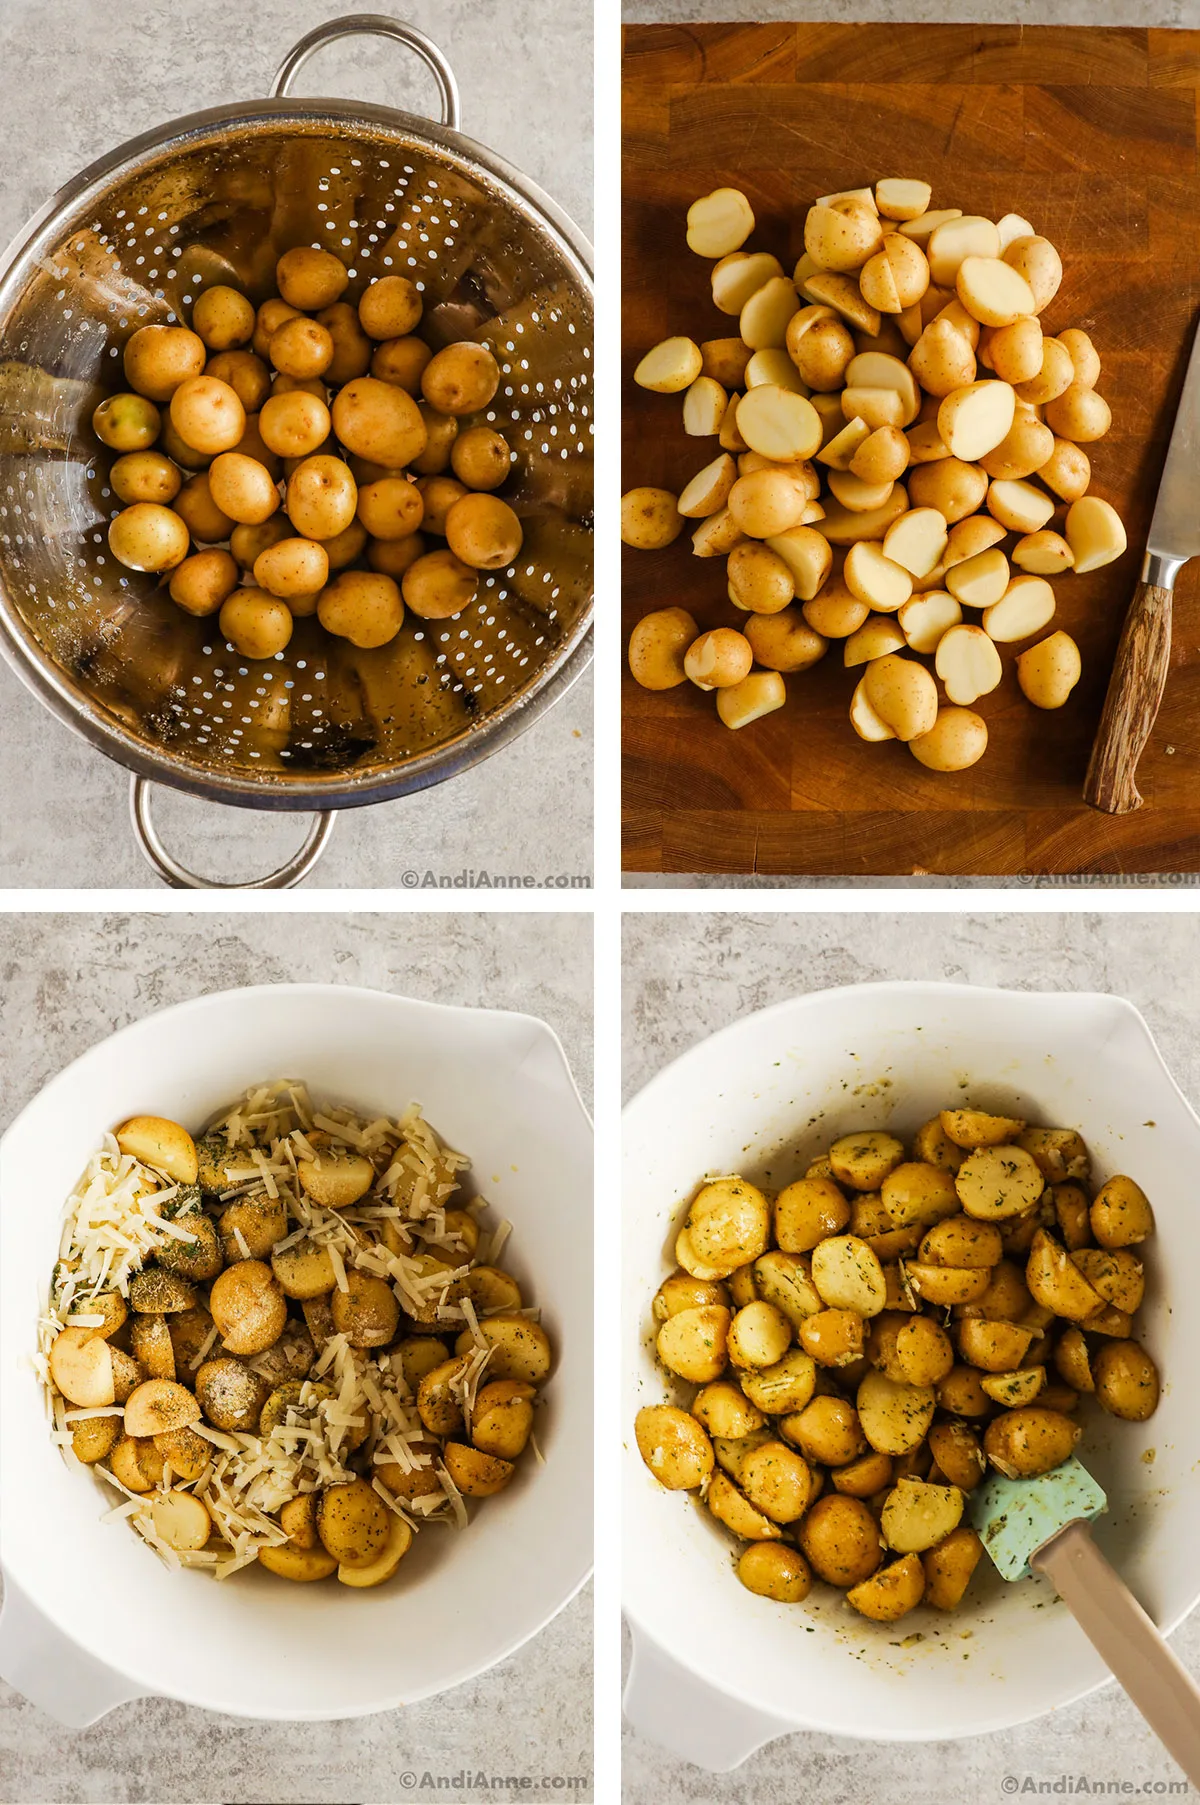 Four images. First is strainer with baby potatoes, second is sliced baby potatoes on a cutting board, third image is a bowl with potatoes, parmesan cheese and spices dumped in. Fourth is baby potatoes tossed with the parmesan and spices in the bowl.